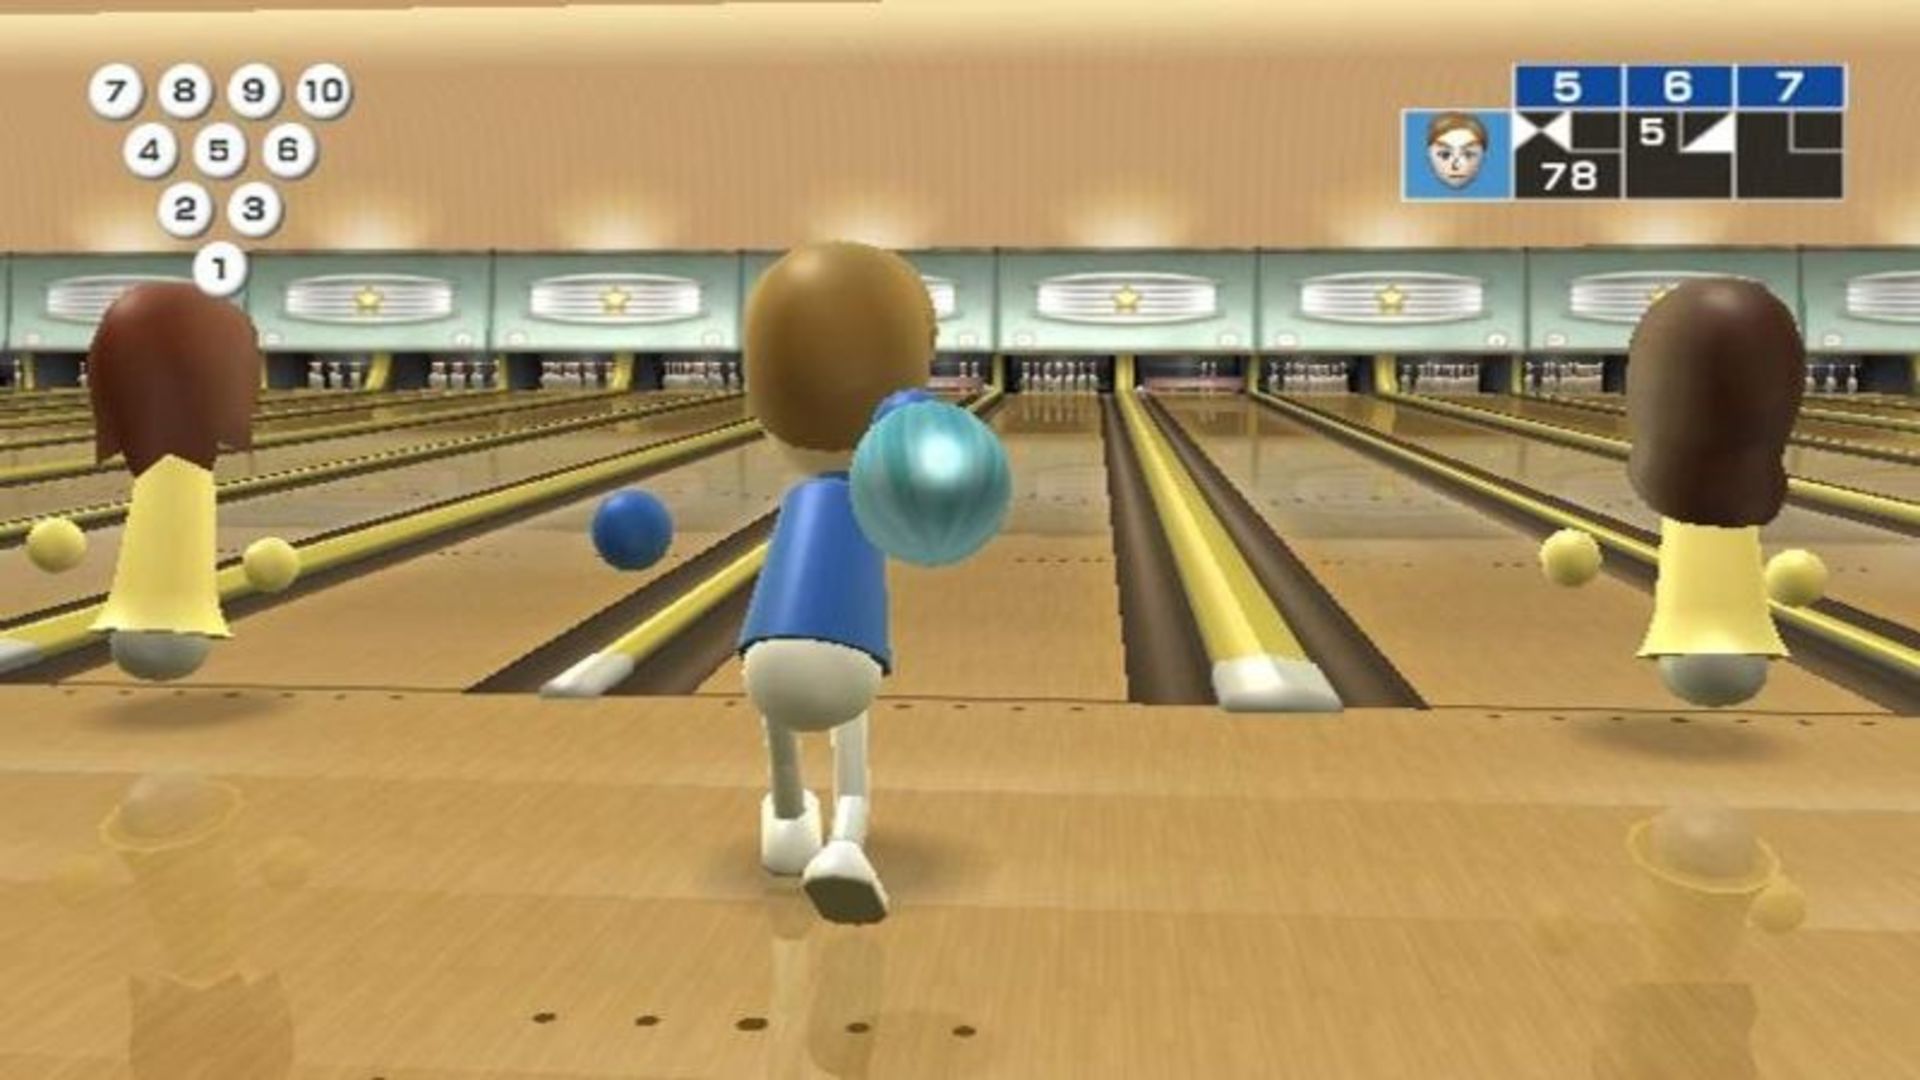 Wii Bowling brought to life is a hilarious reminder of the glory days of motion controls GamesRadar+